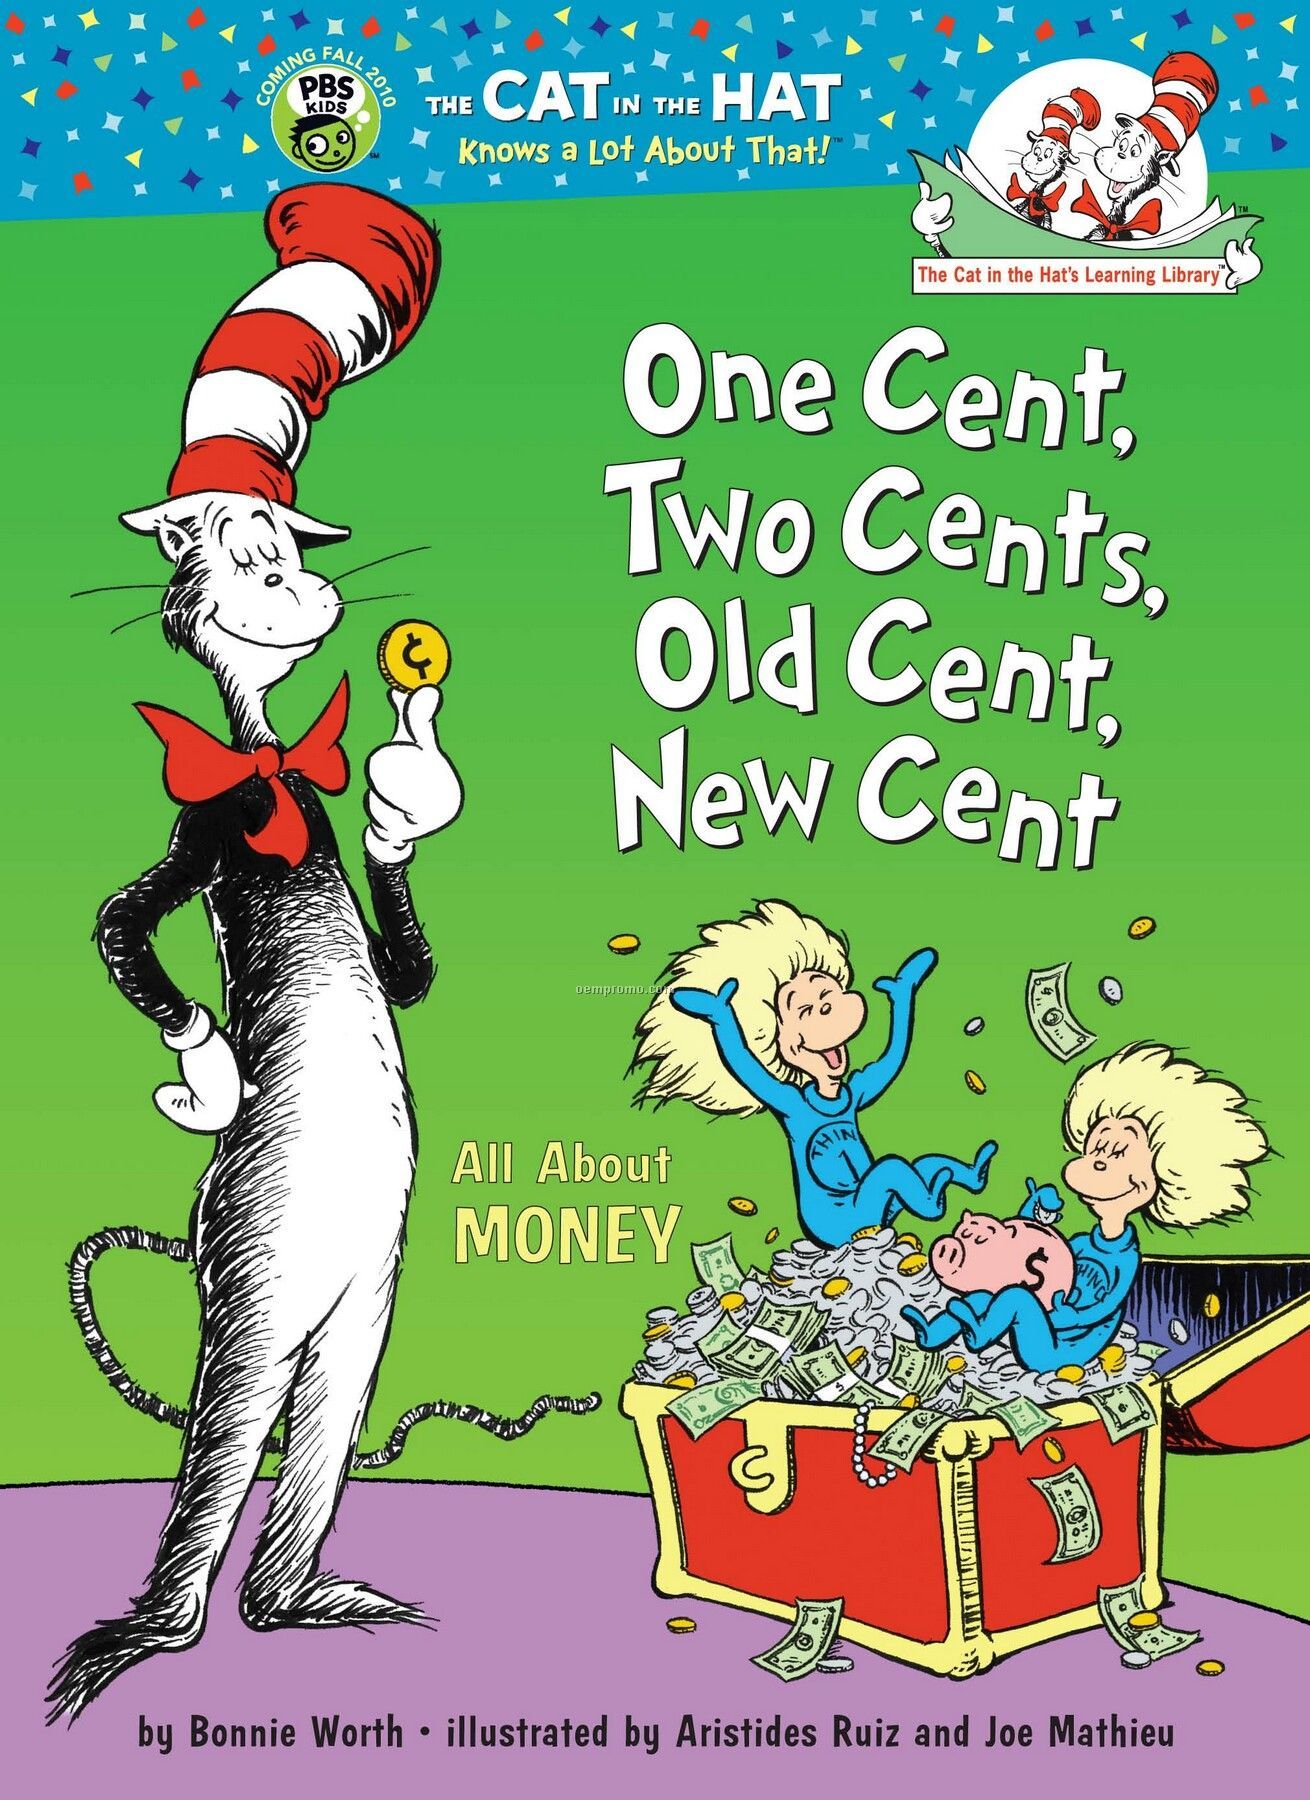 Dr. Seuss: One Cent, Two Cents, Old Cent, New Cent